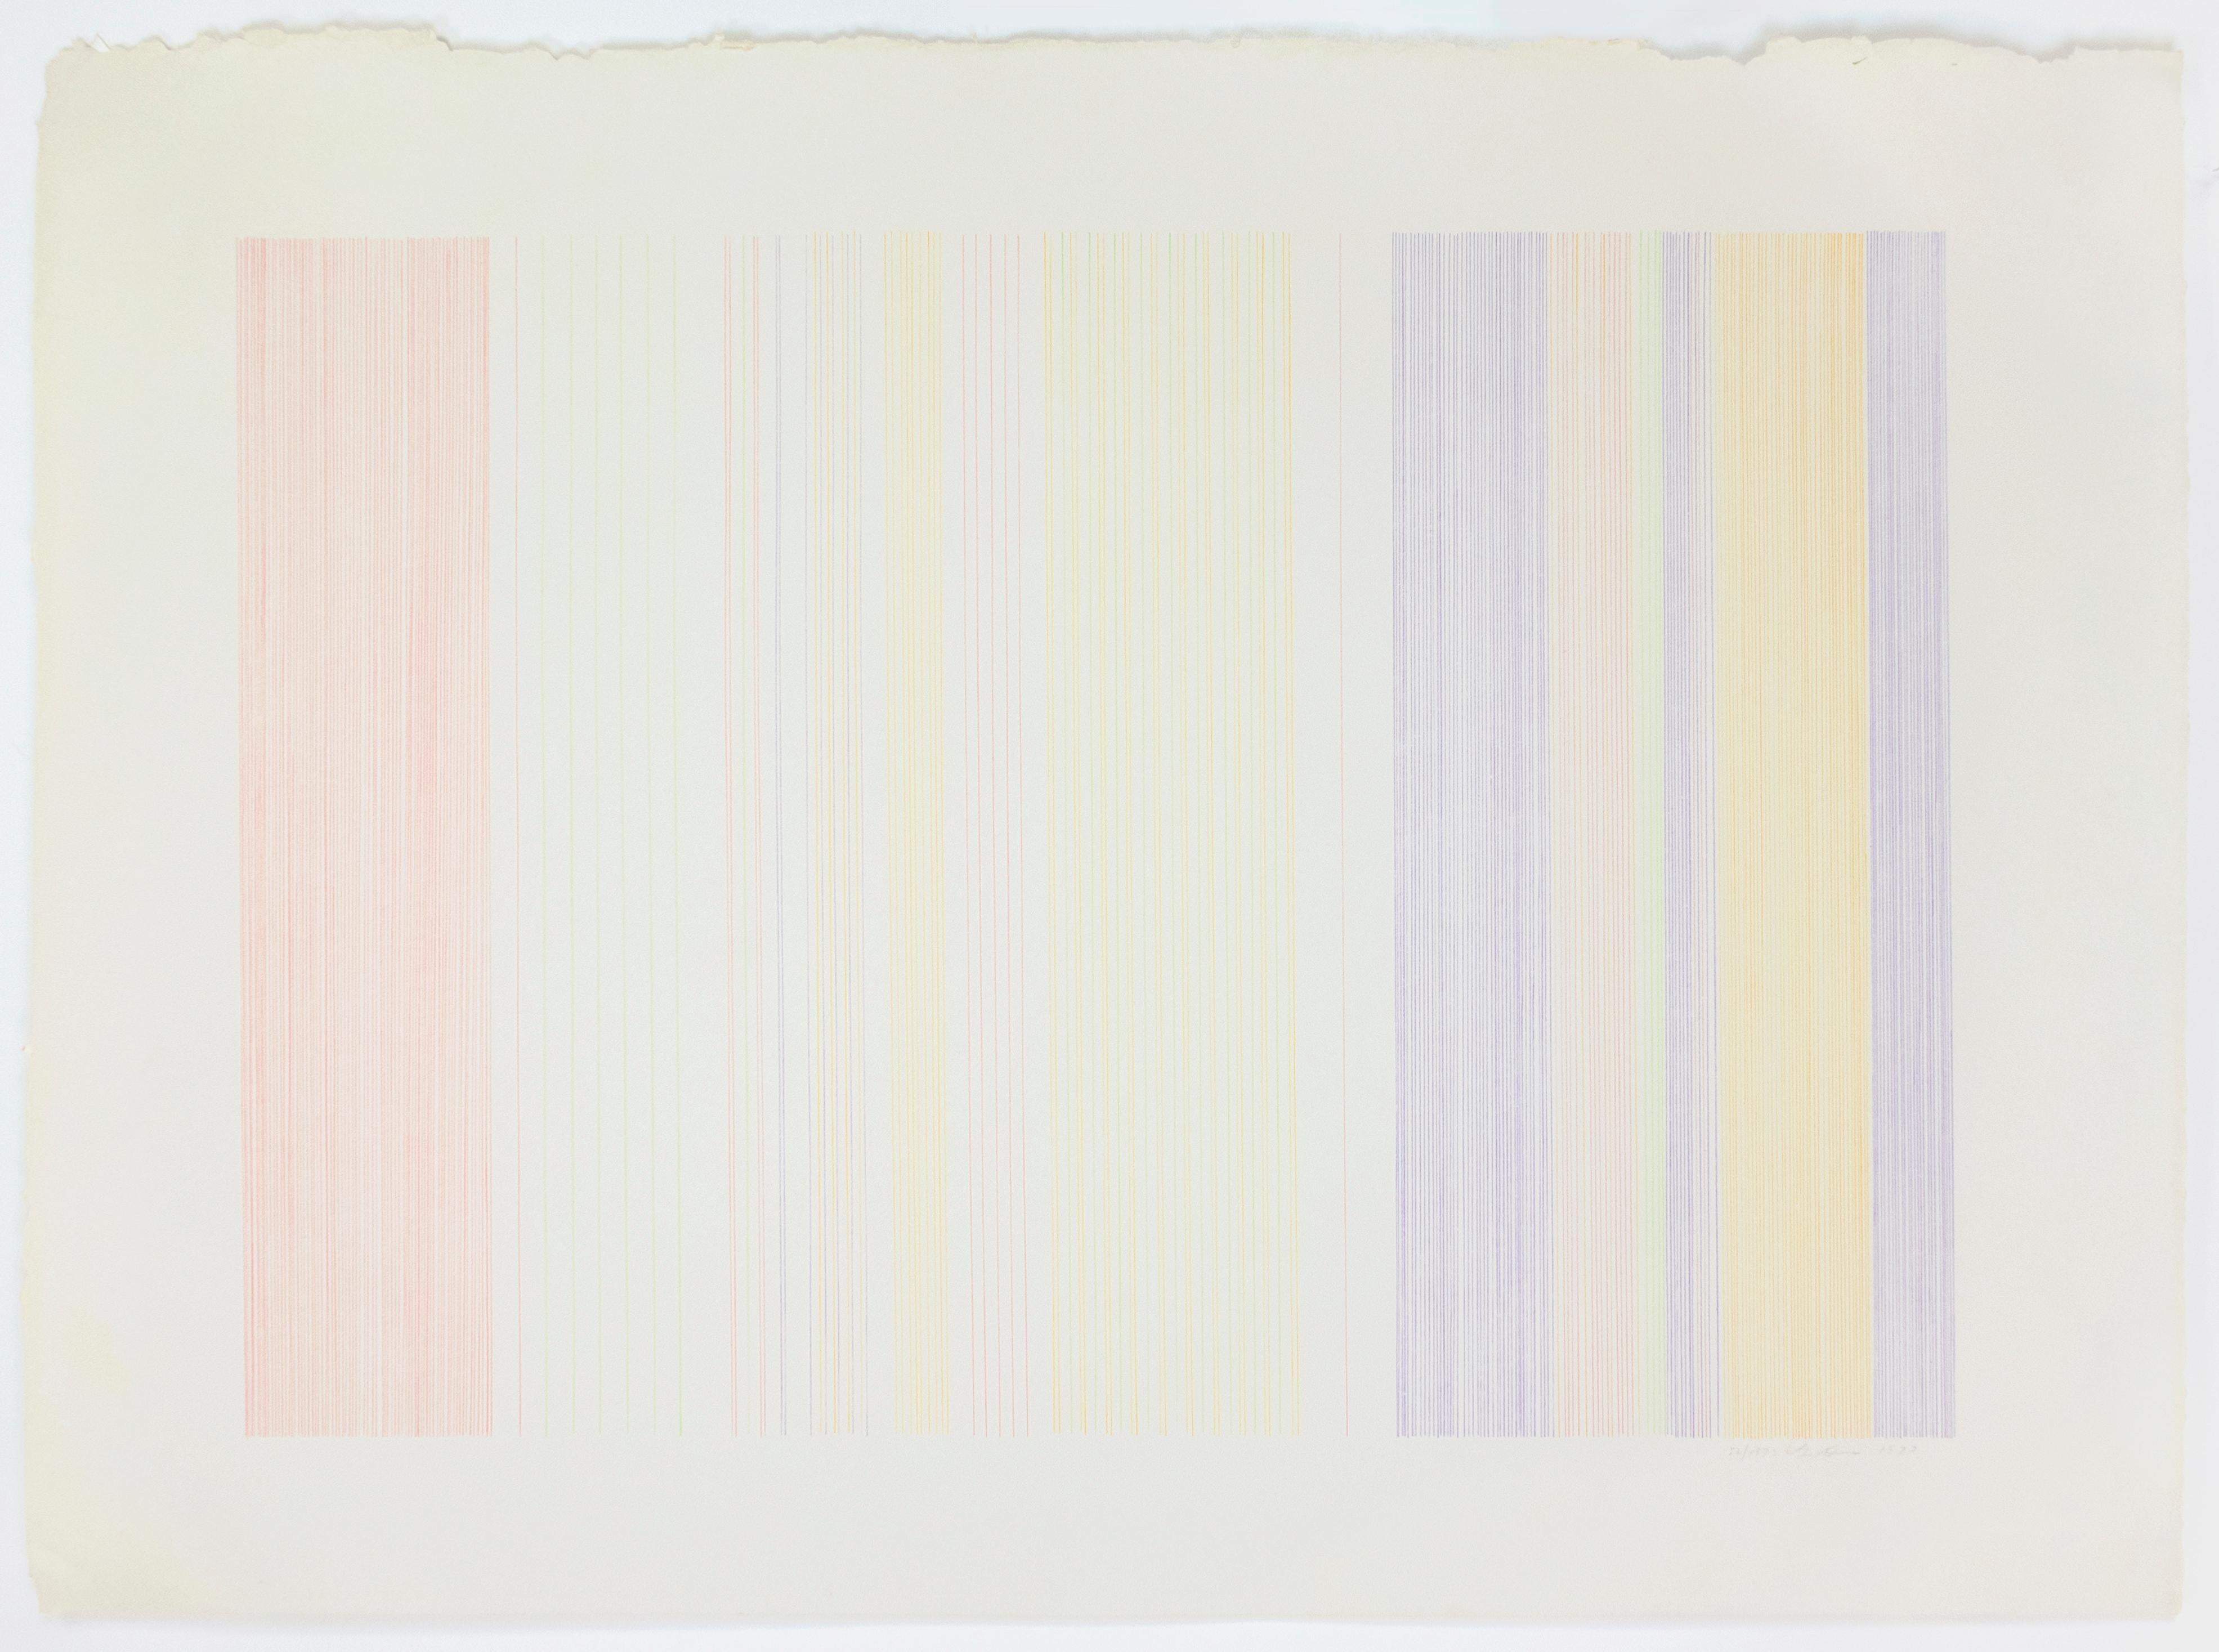 Gene Davis Abstract Print - Home Run: abstract modern minimalist color field drawing with rainbow colors